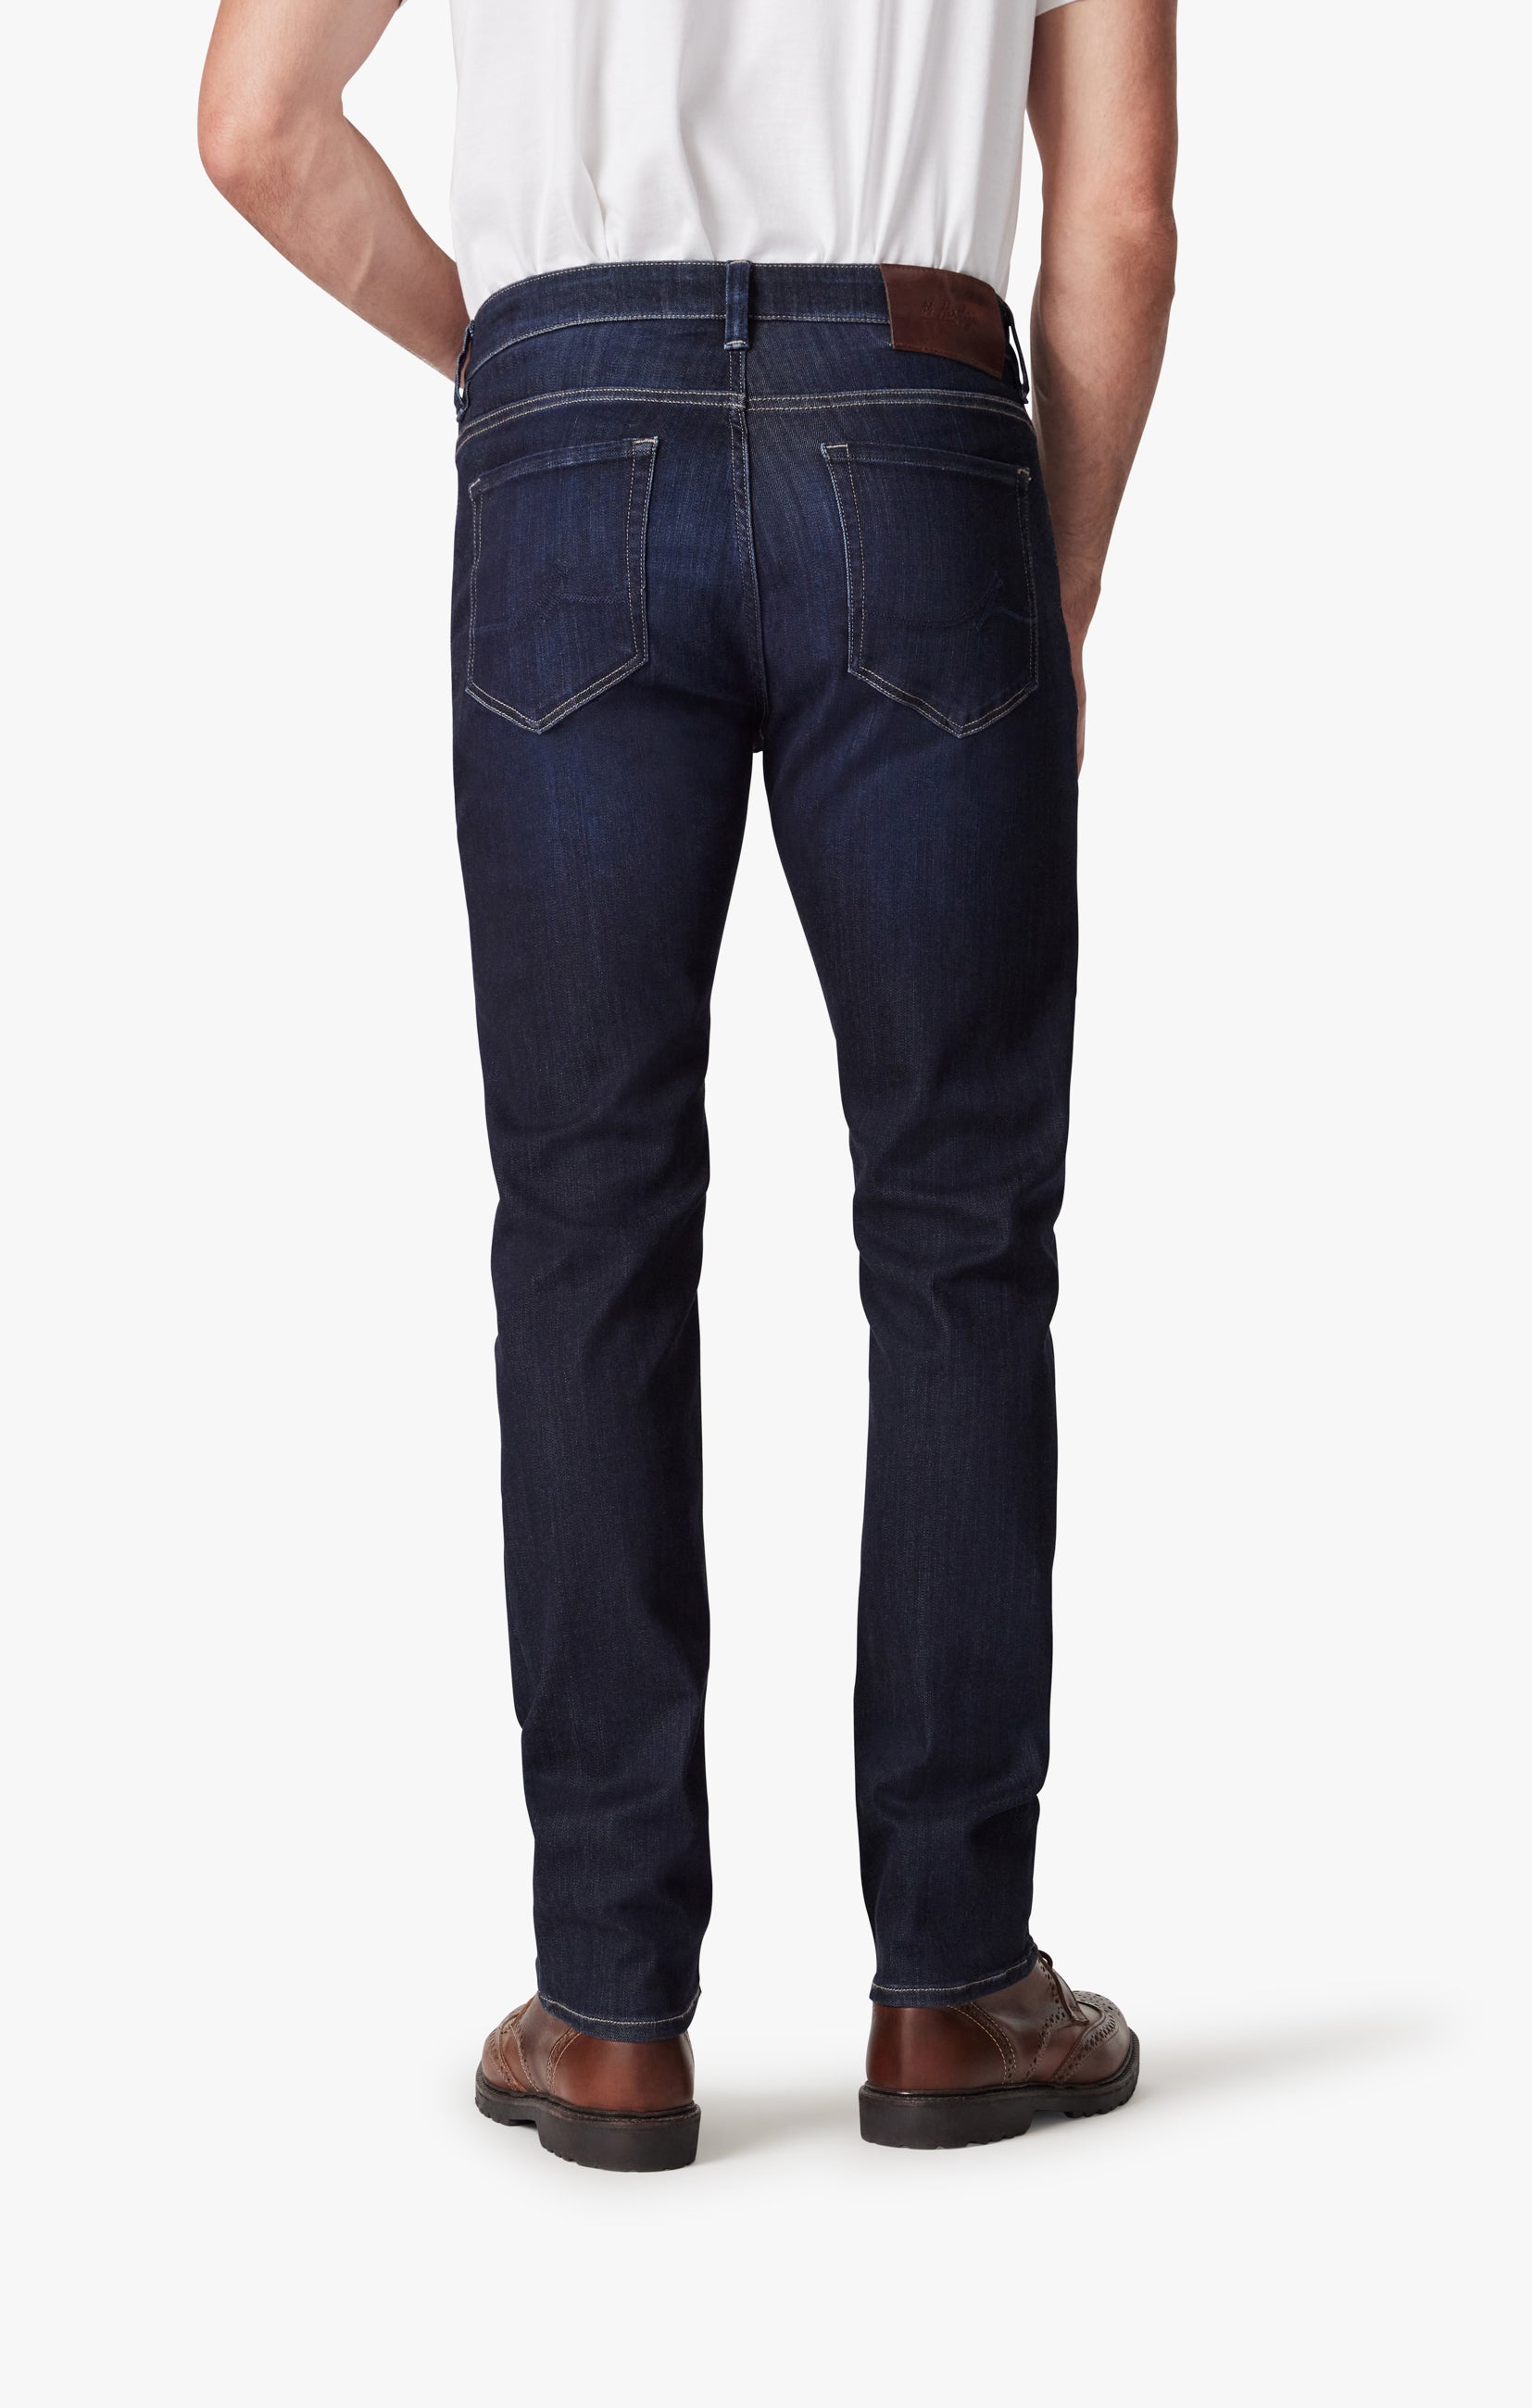 Champ Athletic Fit Jeans in Deep Refined Image 5